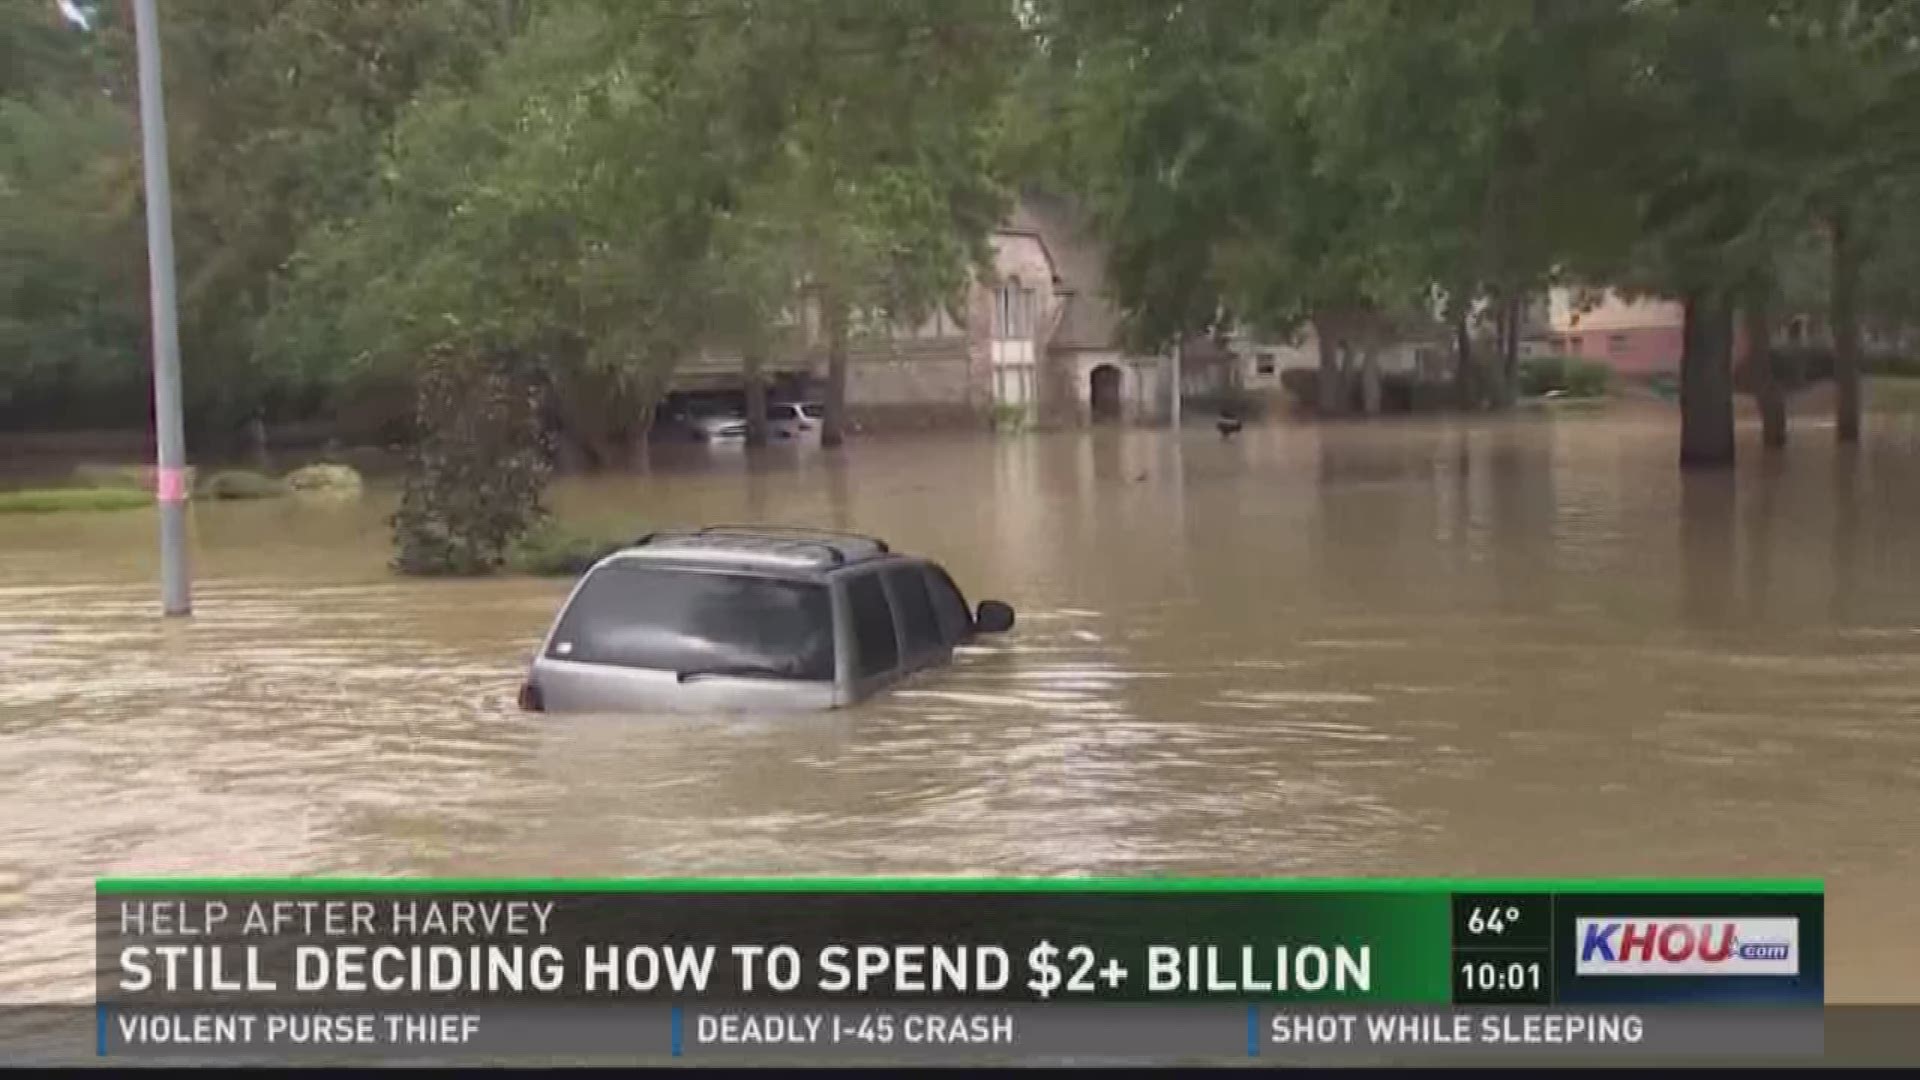 Houston and Harris County received more than $2 billion combined from the federal government to help with Harvey repairs but it could be months before anyone sees a dime